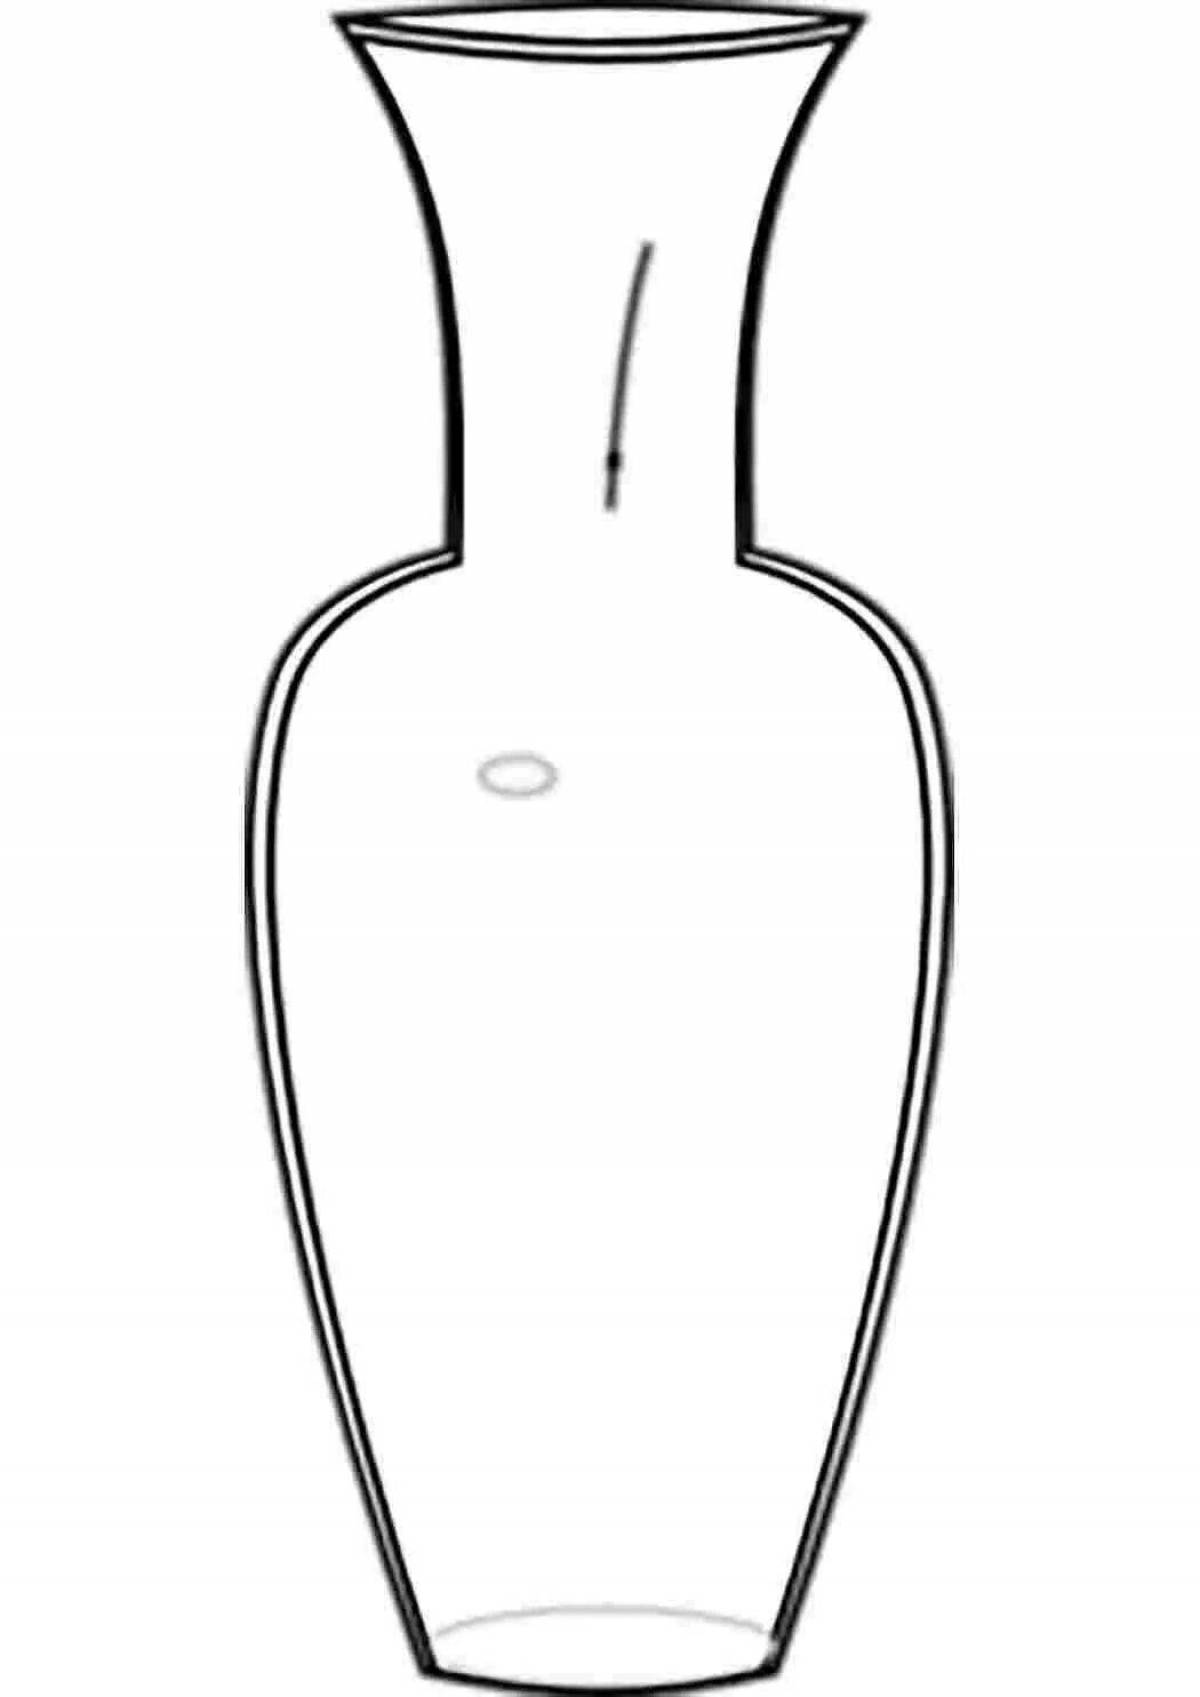 Immaculate vase coloring page